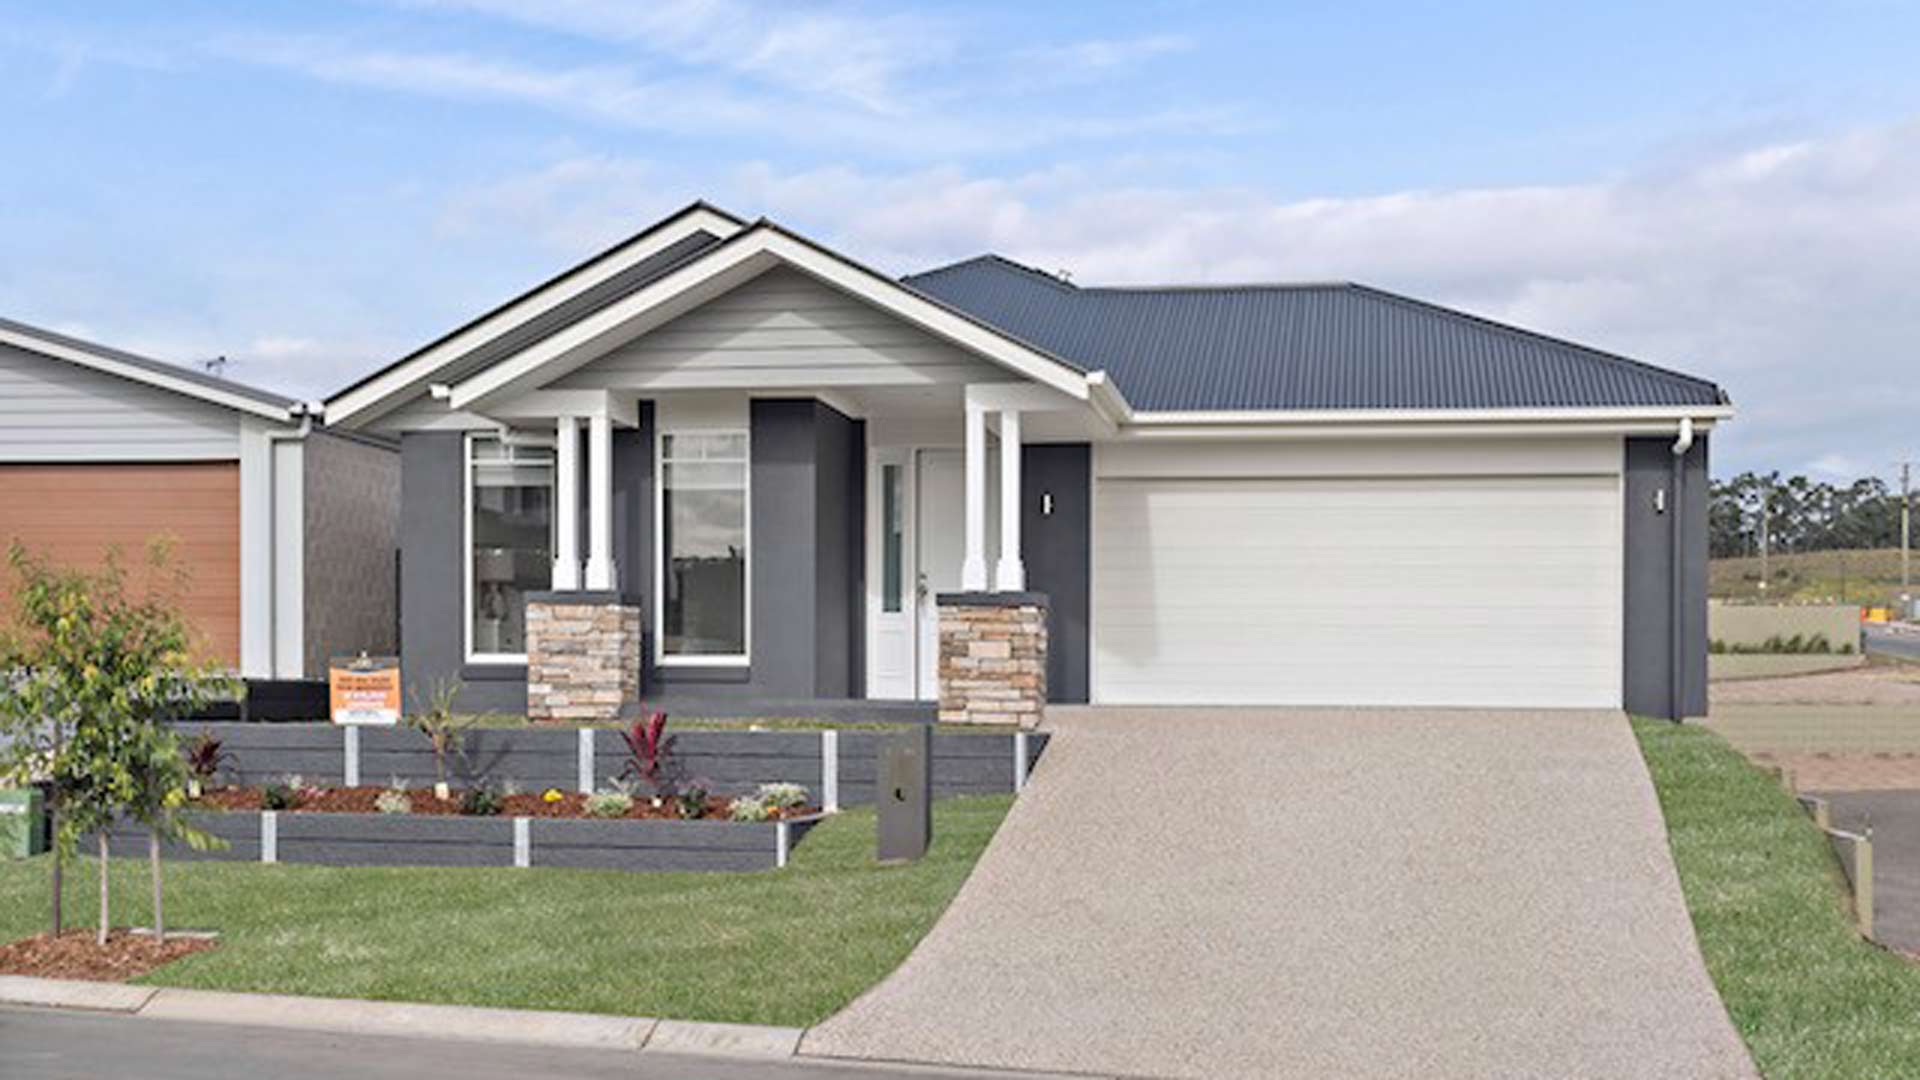 Alphaline's new display home opens this Saturday